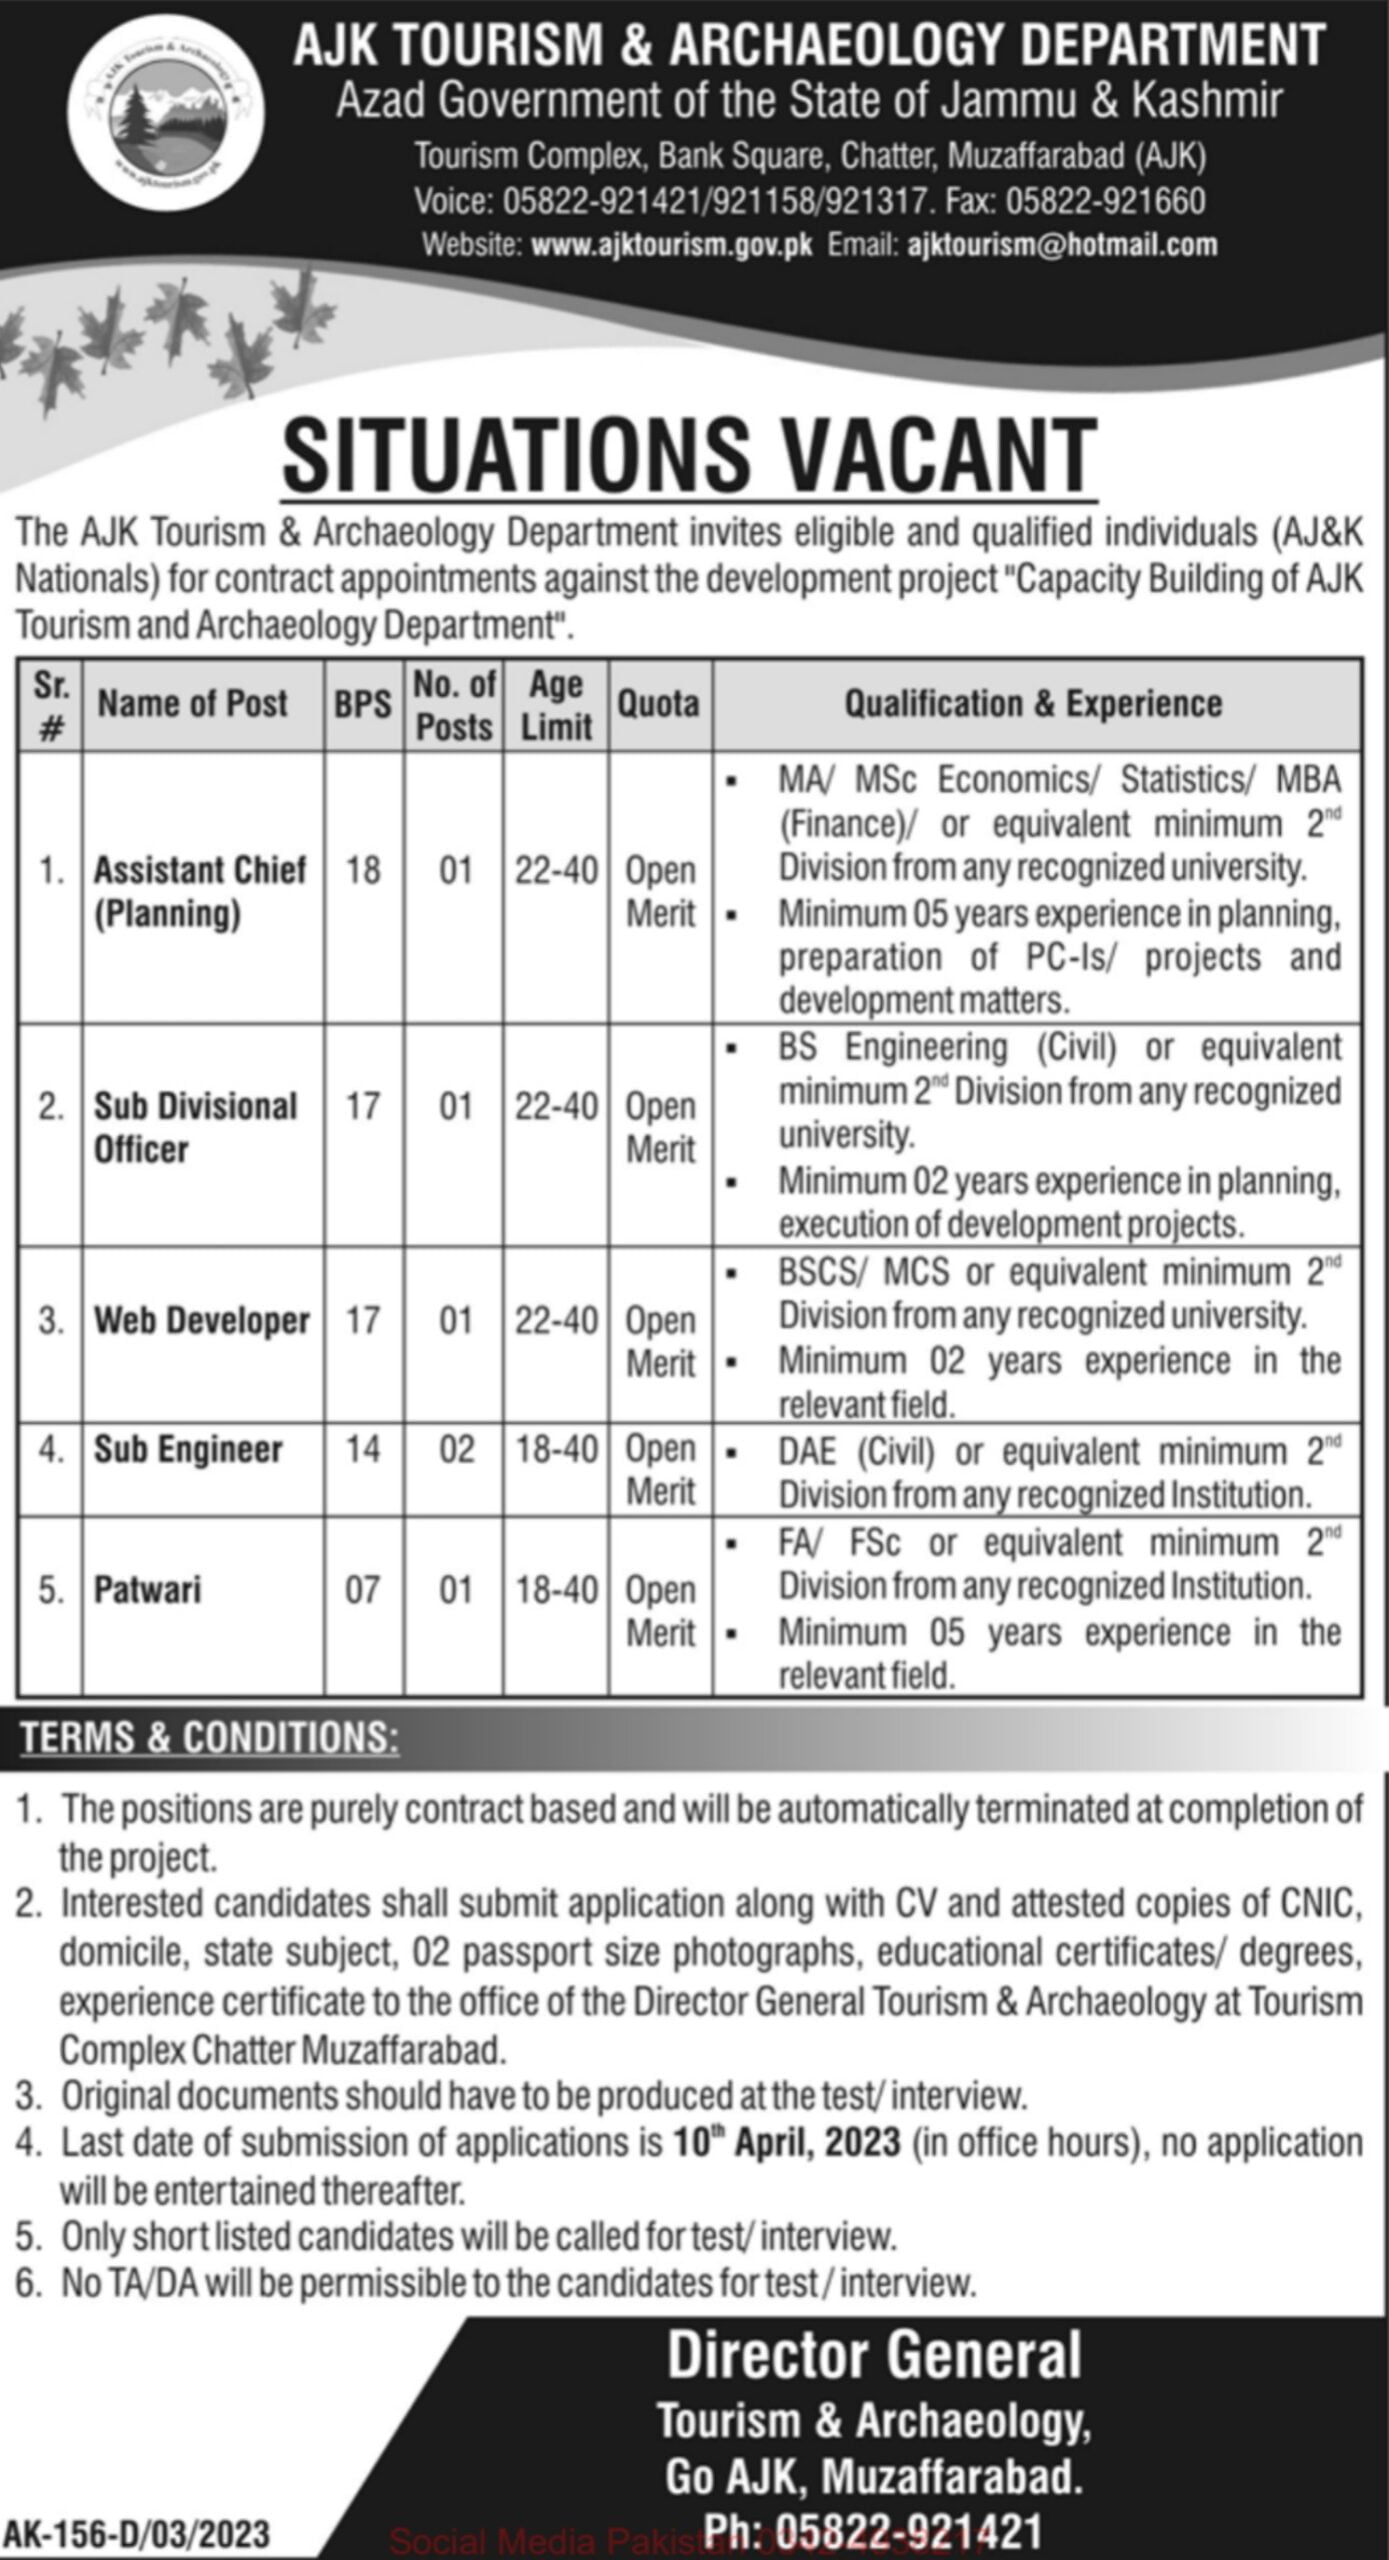 Latest jobs in AJK Tourism and Archaeology Department 2023